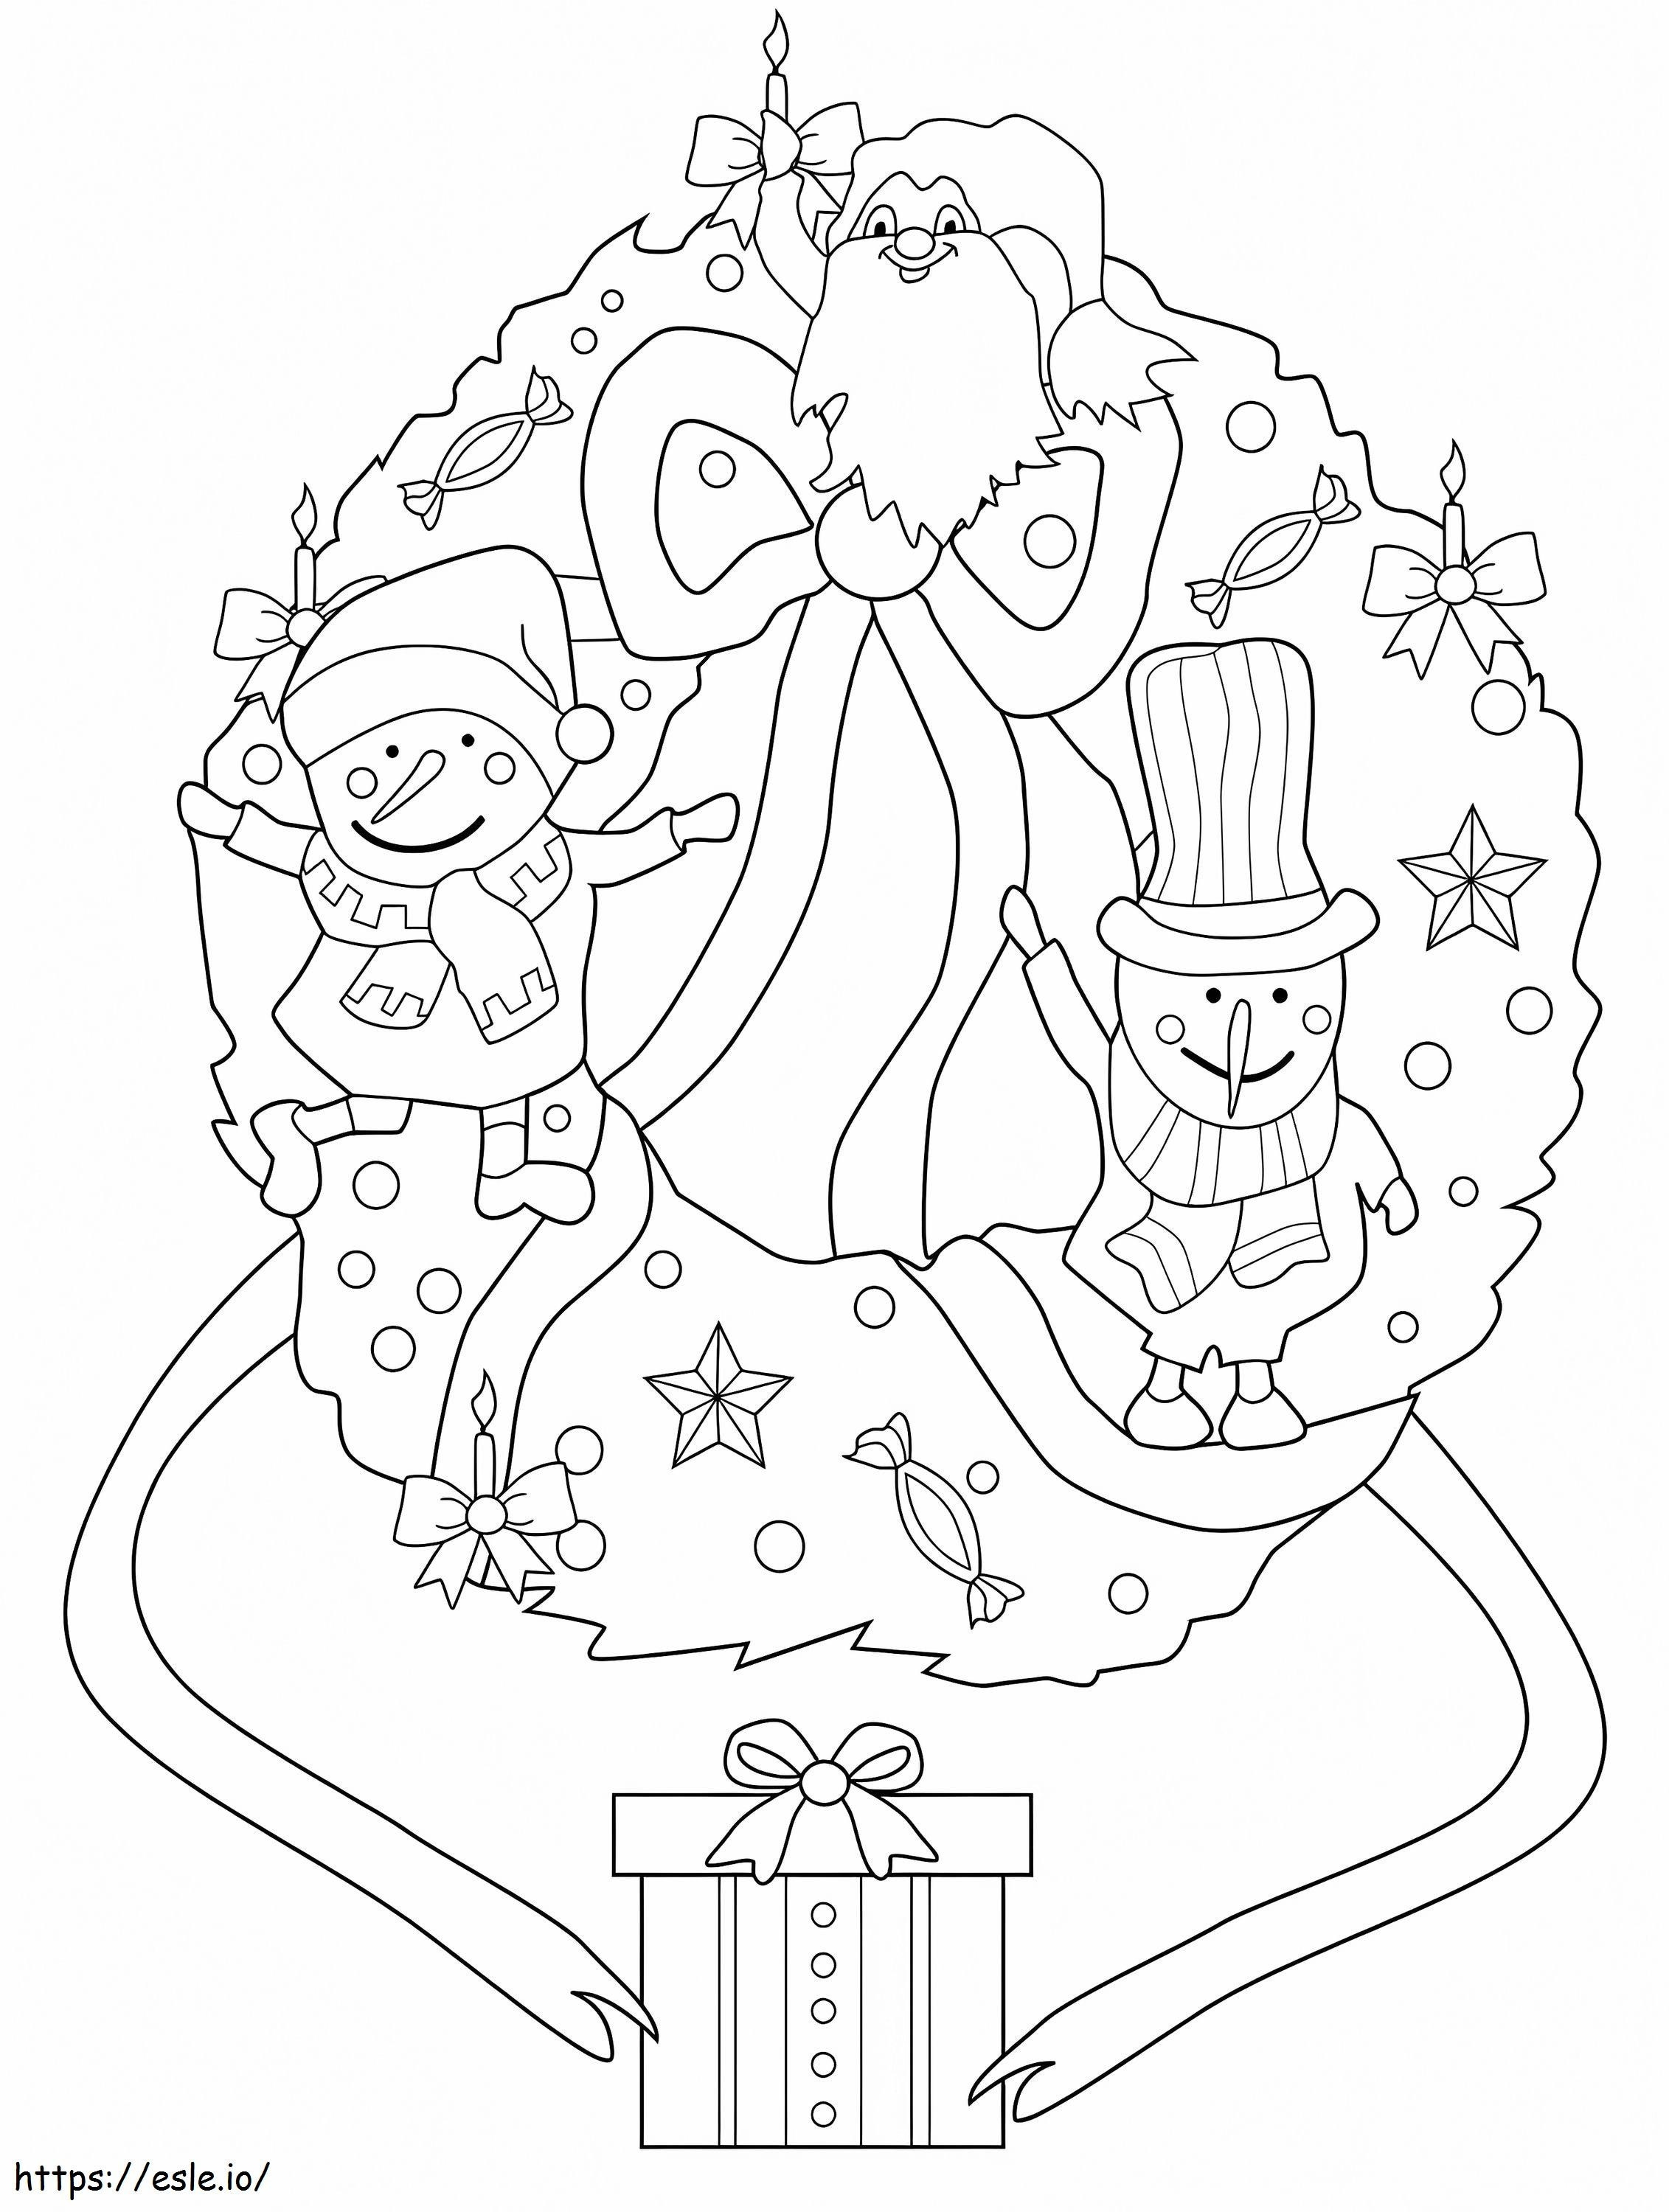 Loaded Christmas Wreath coloring page